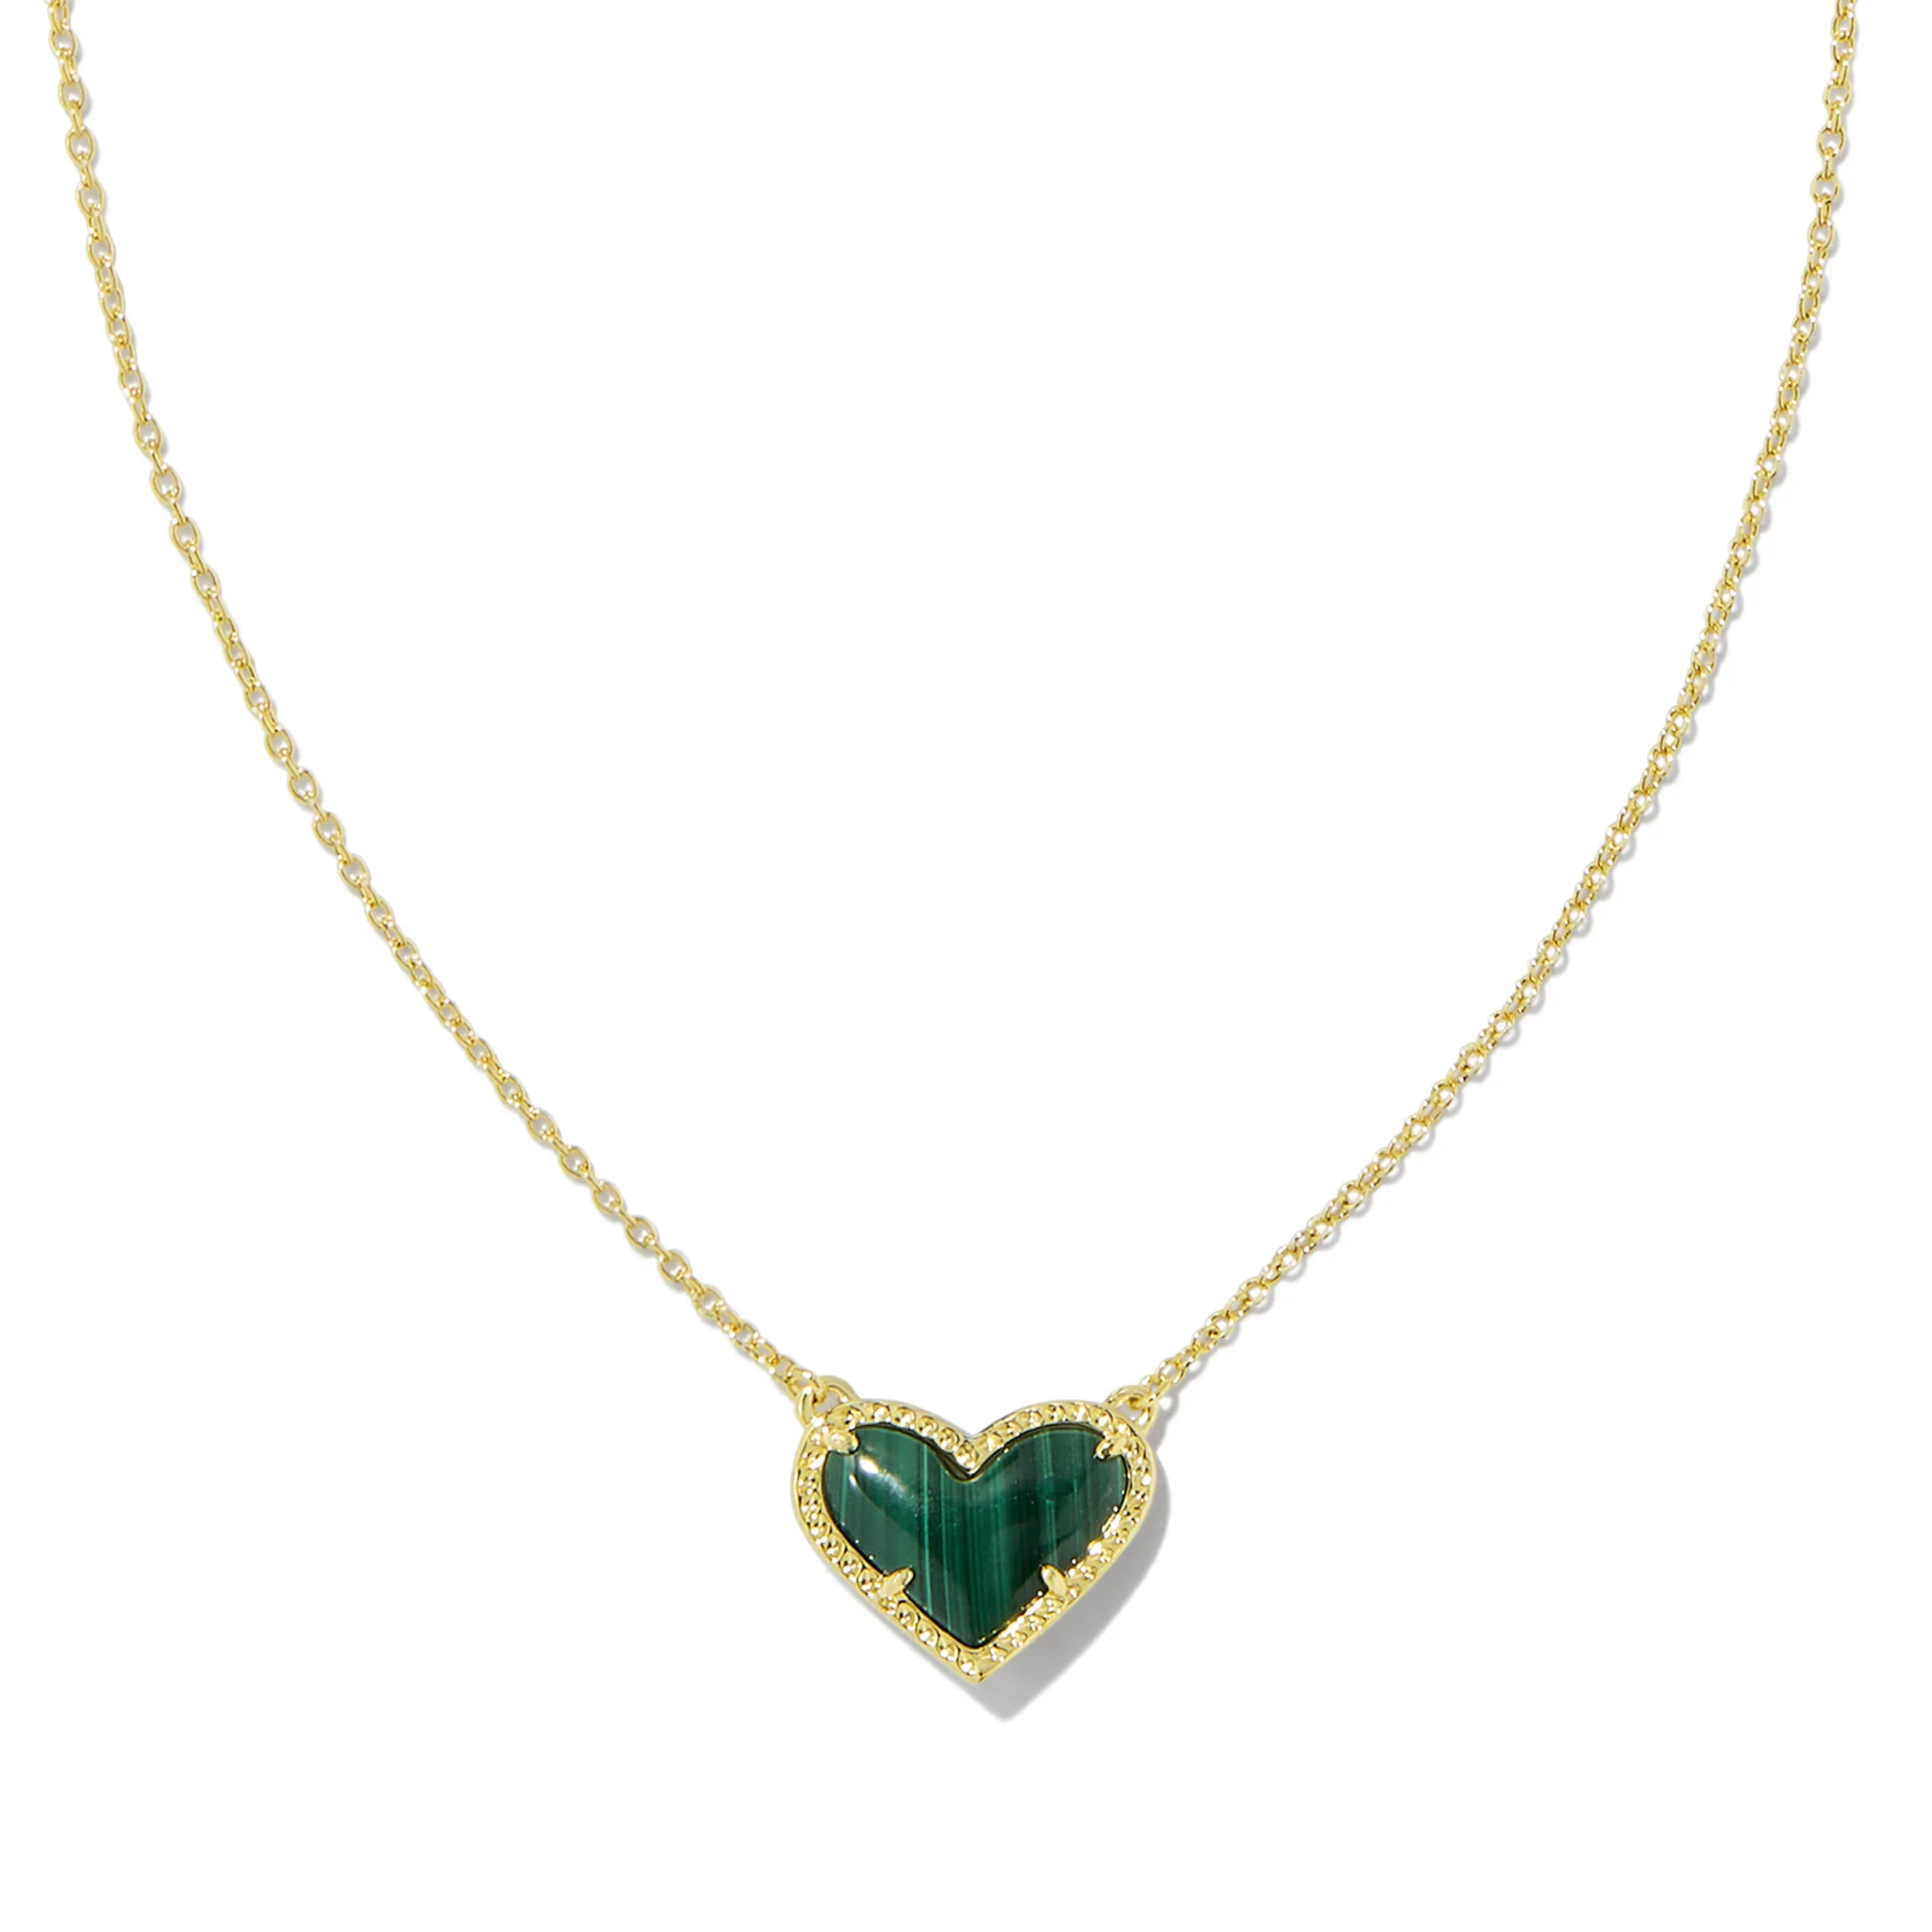 This Ari Heart Gold Short Pendant Necklace in Green Malachite by Kendra Scott is pictured on a white background.